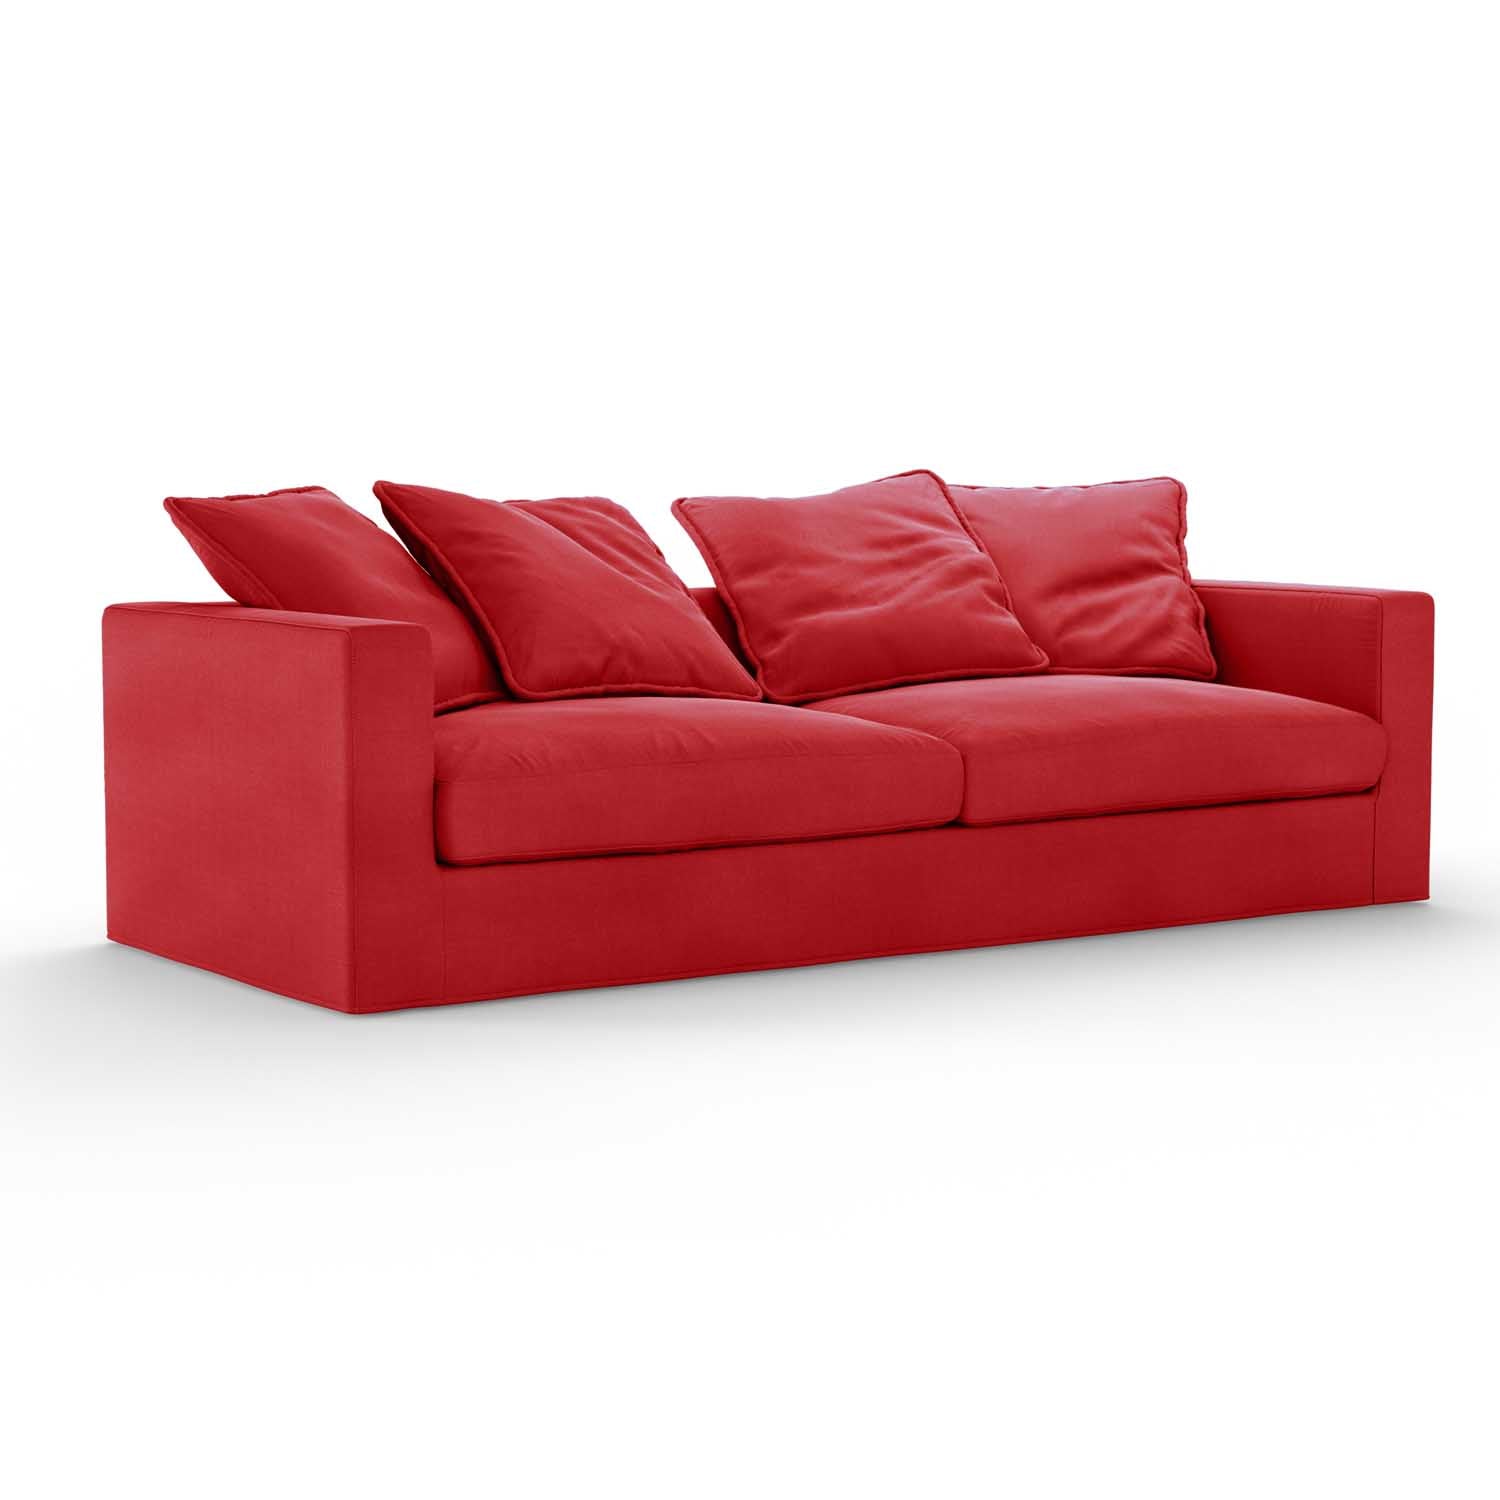 Modern Elegance Focal Point Red sustainable cotton sofa